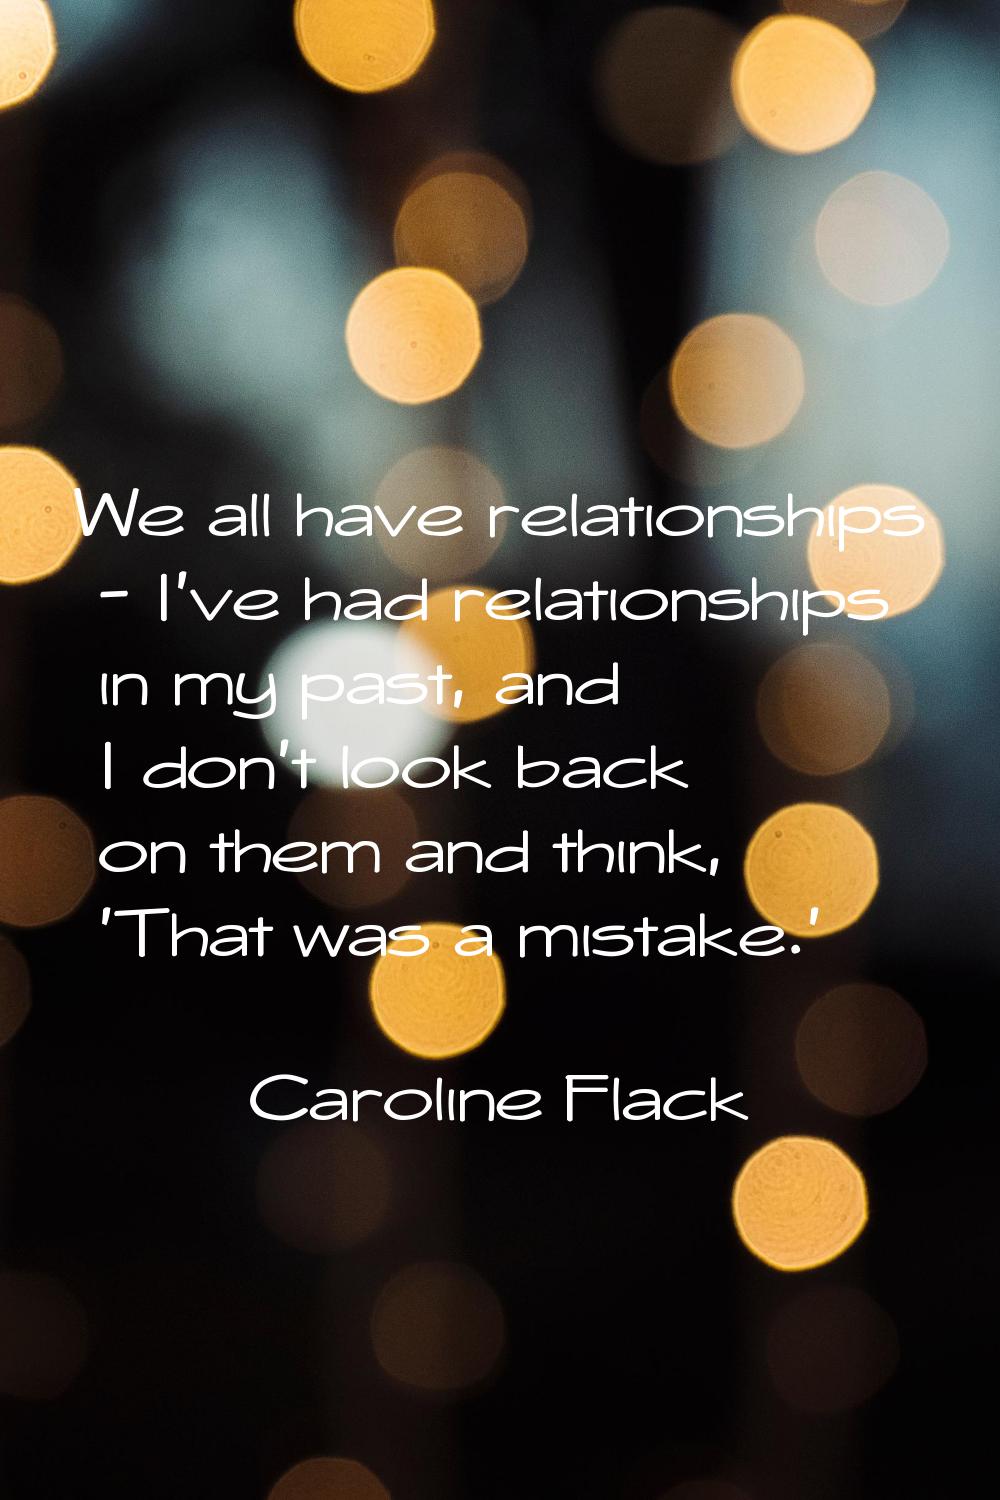 We all have relationships - I've had relationships in my past, and I don't look back on them and th